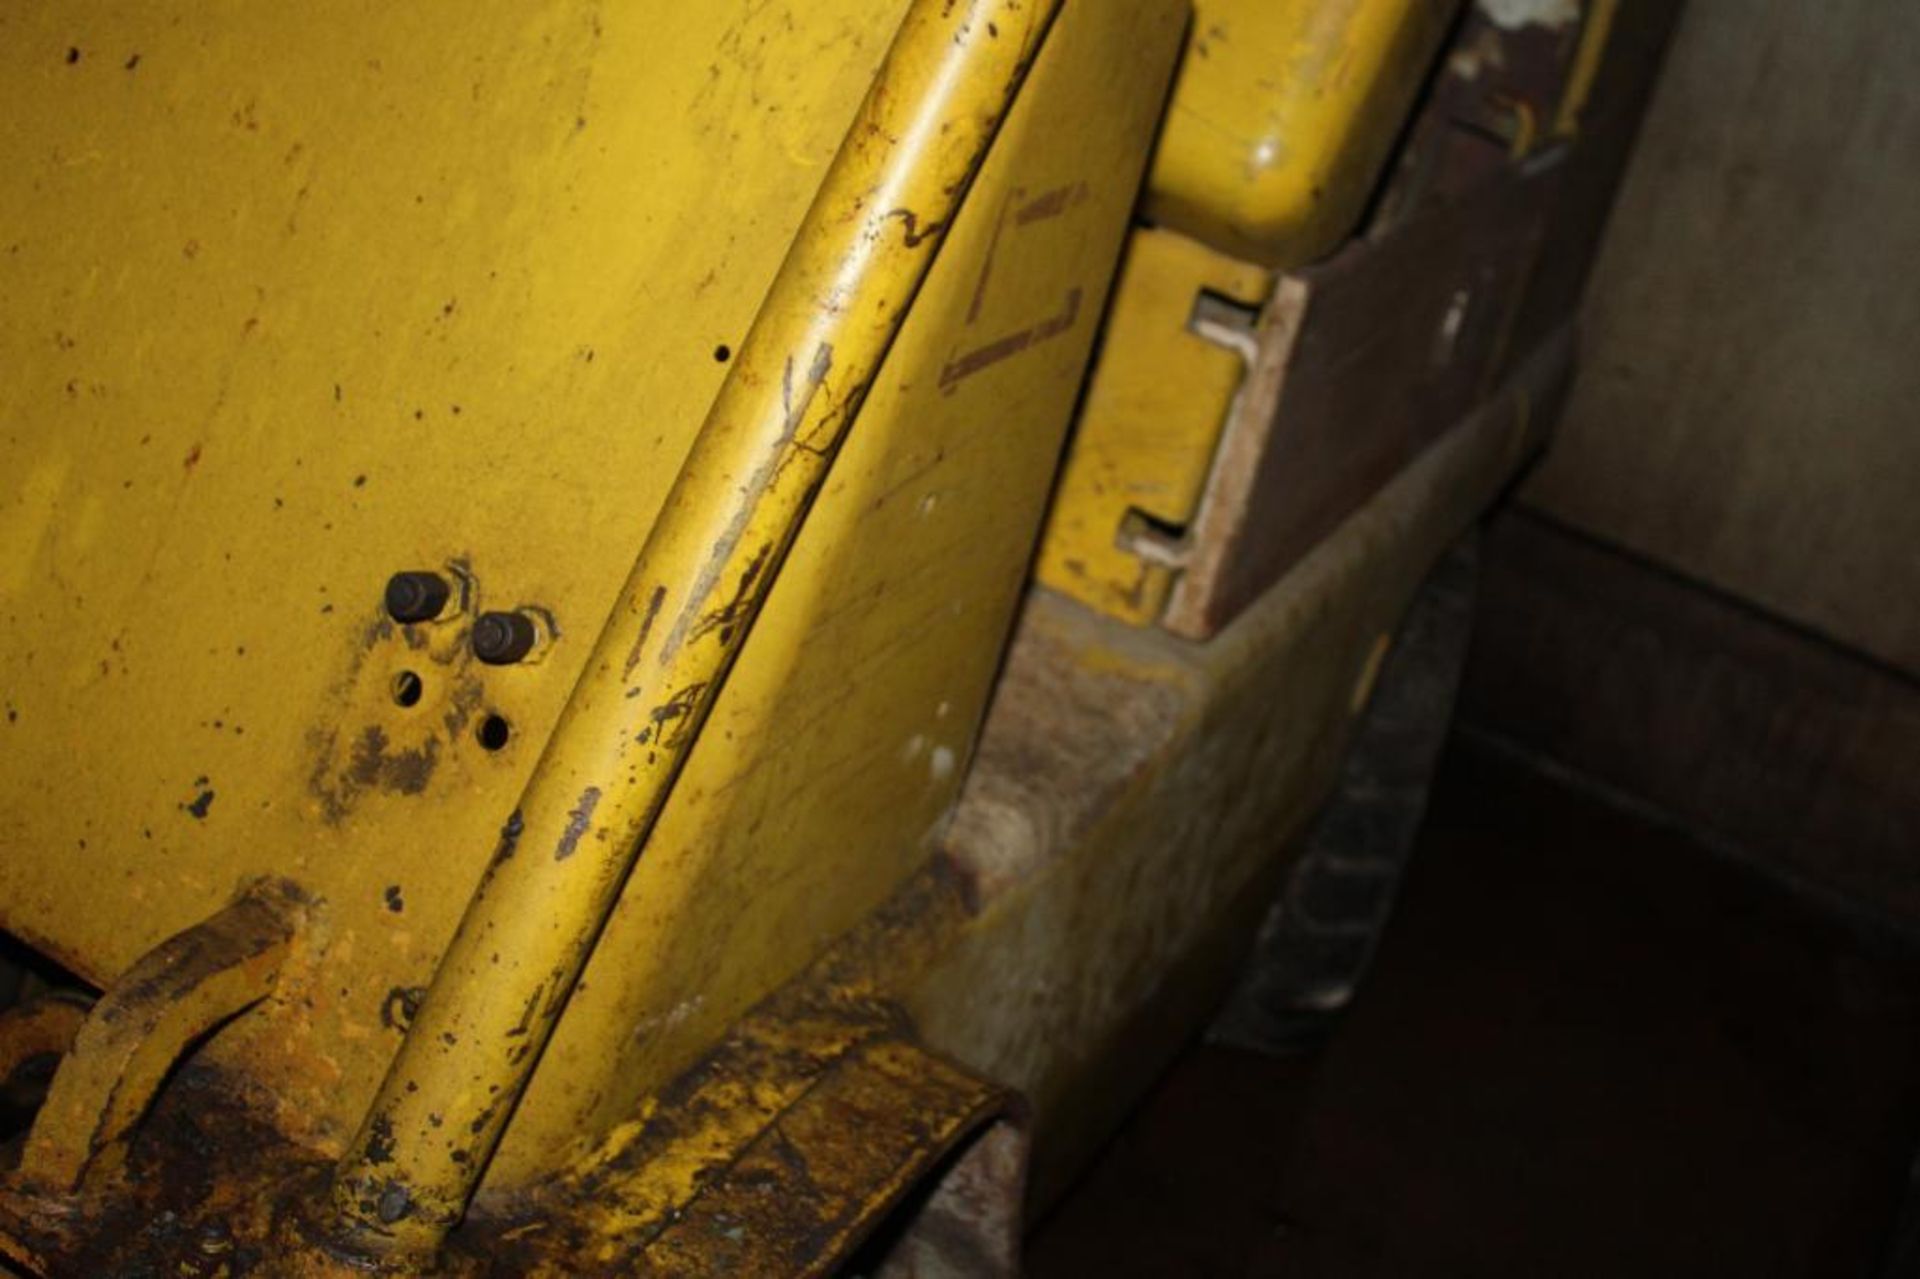 Caterpillar Tow Motor Forklift - Runs but has hydraulic issues and overheats - Image 16 of 16